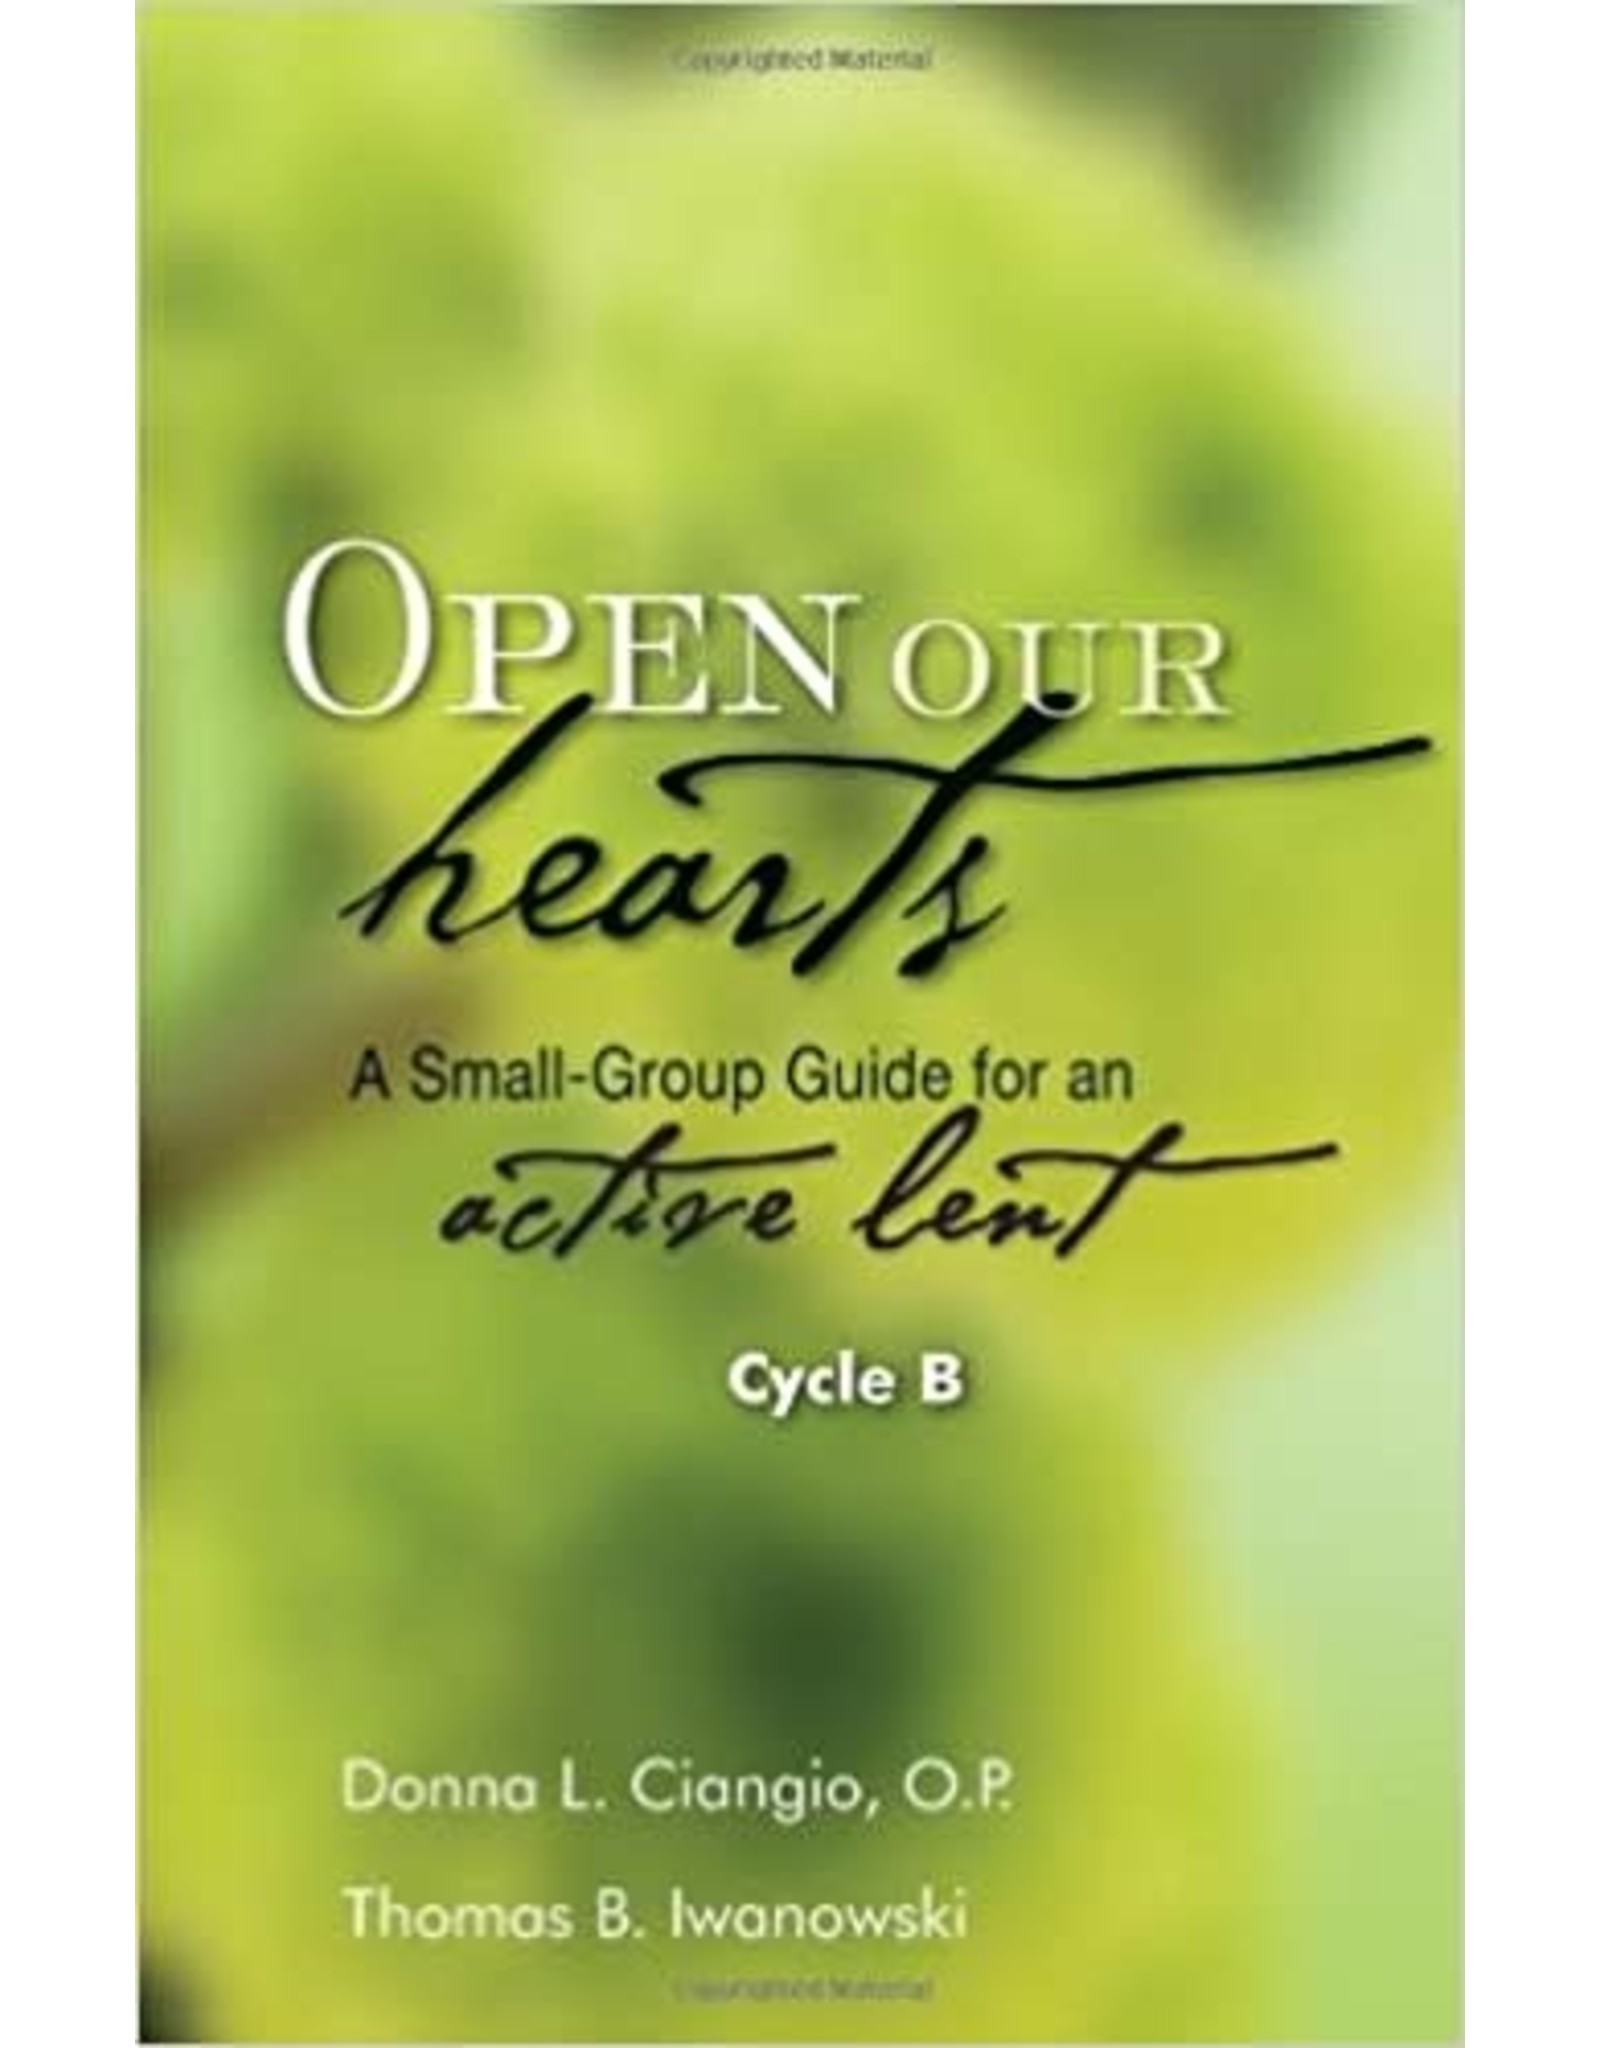 Open Our Hearts: A Small-Group Guide for an Active Lent (Cycle B)